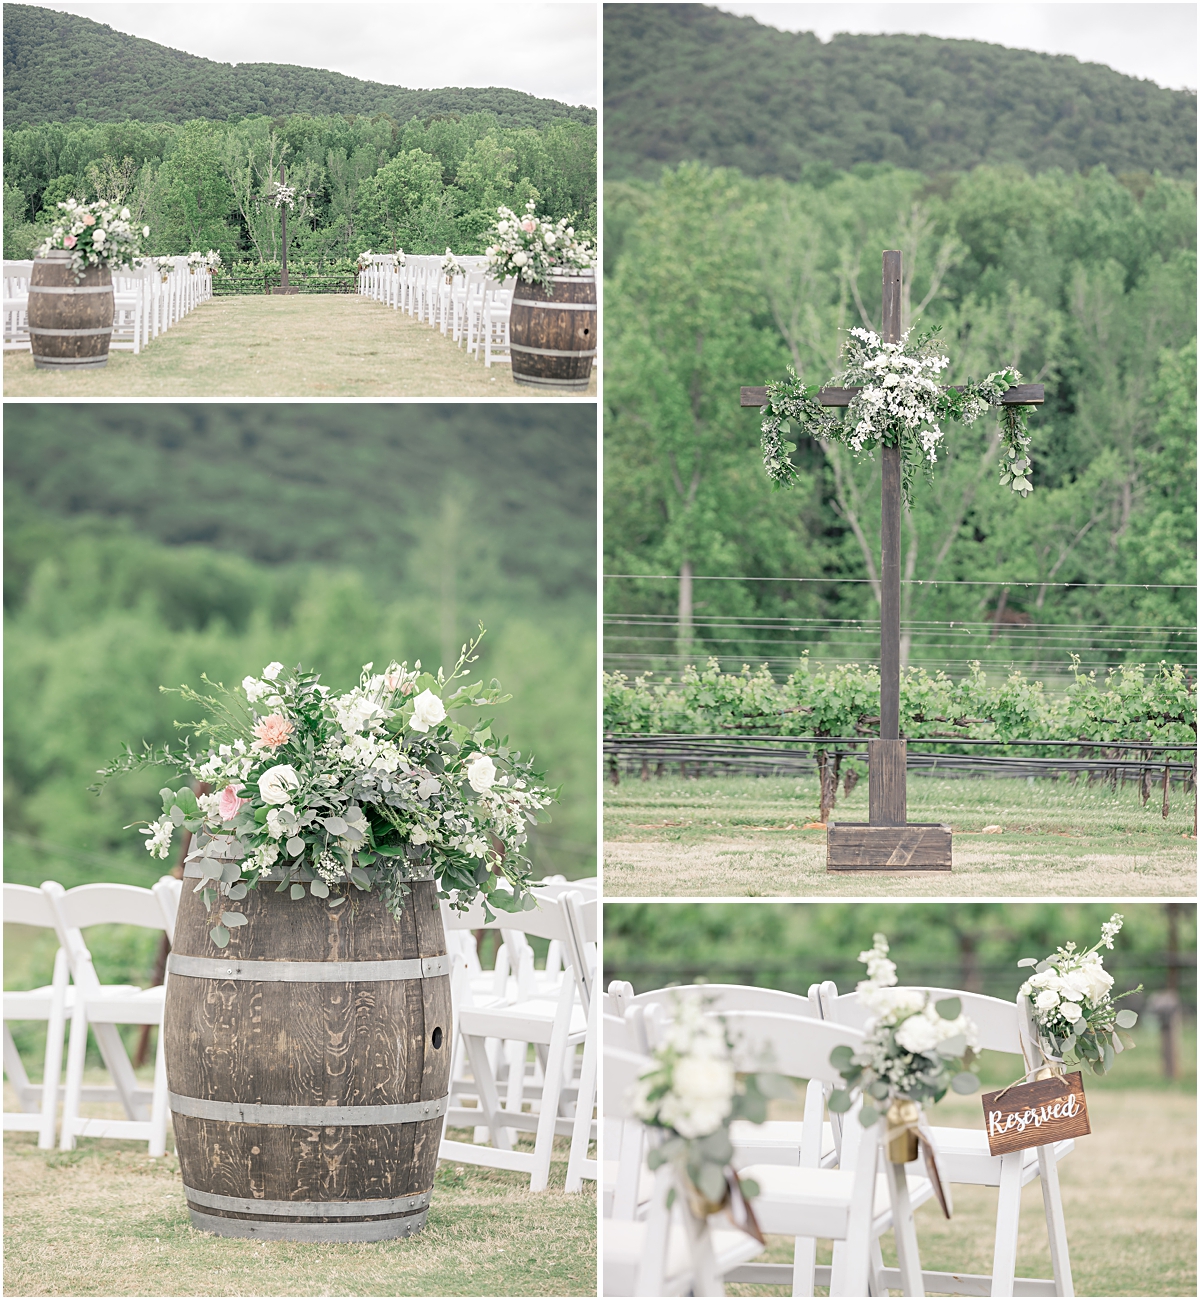 Detail photos of the ceremony location at Cleveland GA Wedding Venues